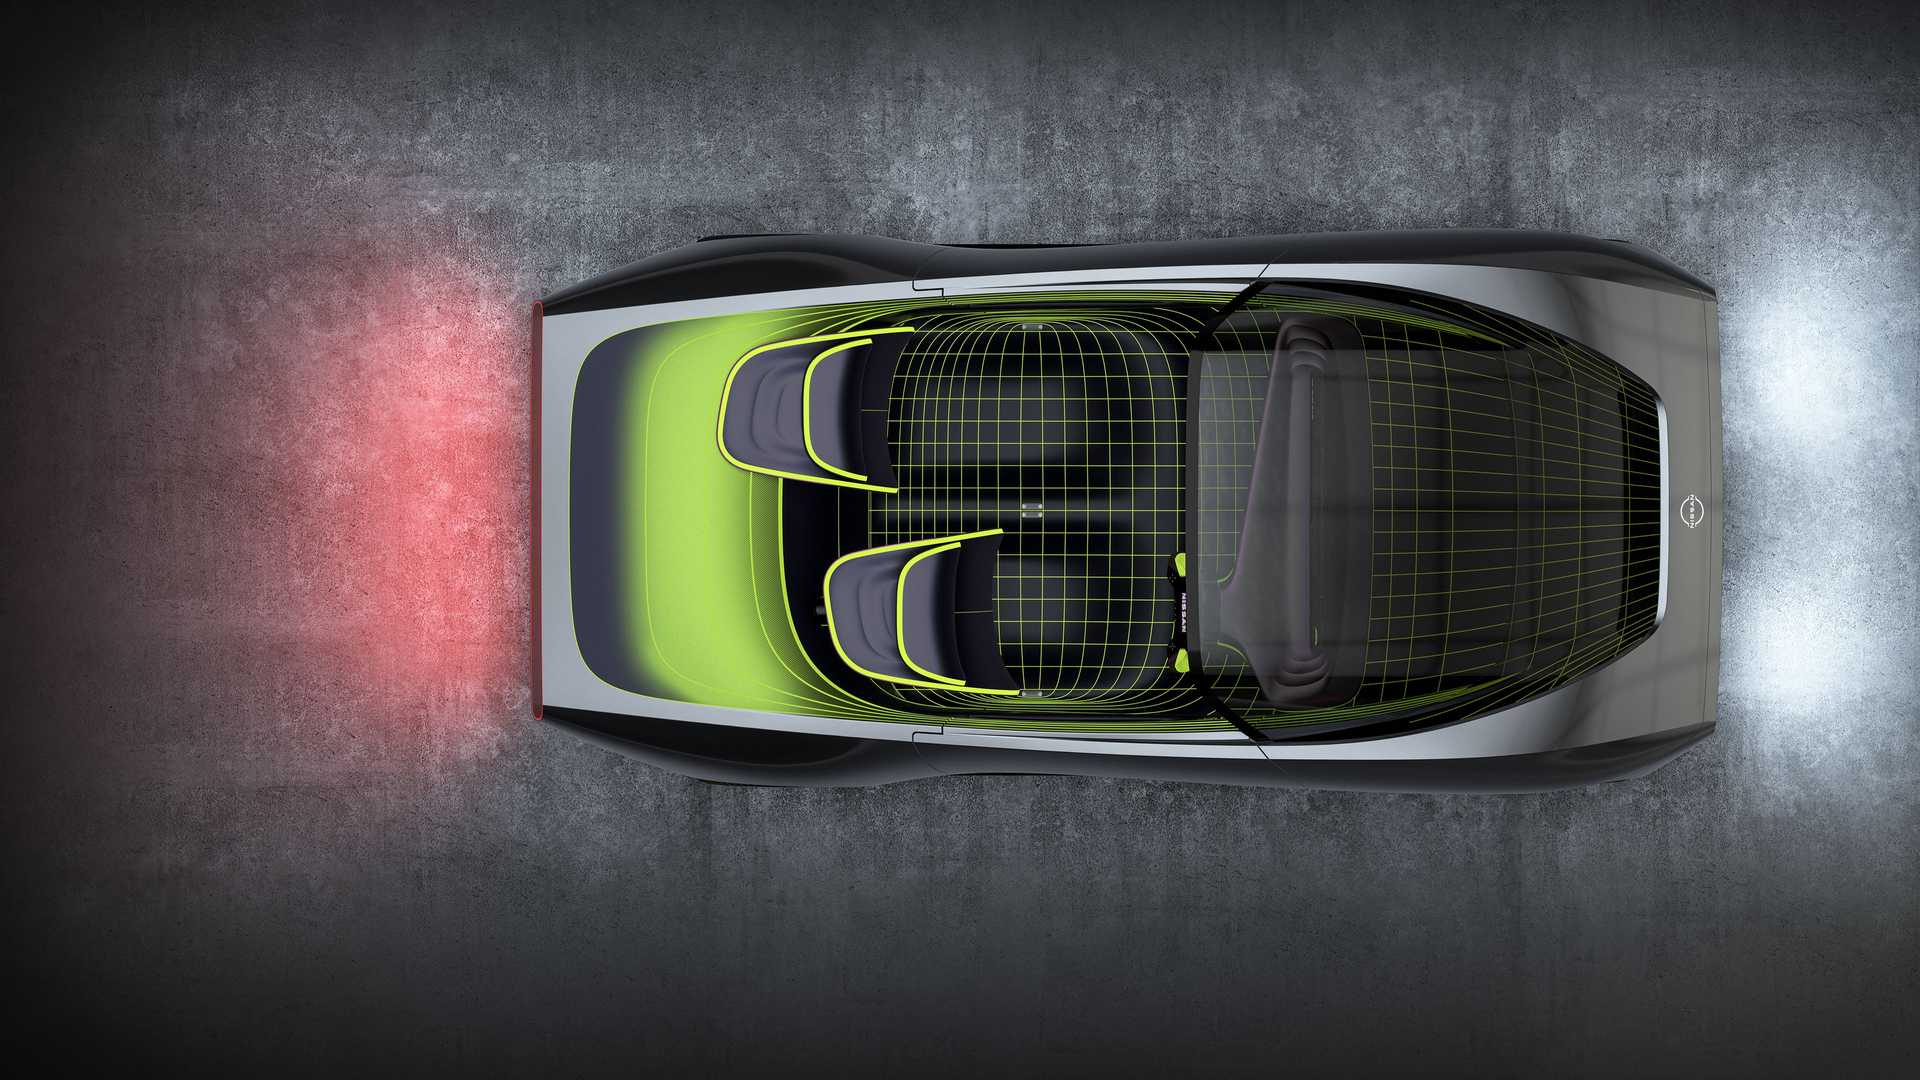 New Nissan Concepts Preview Leaf Successor, Solid-State Battery EVs